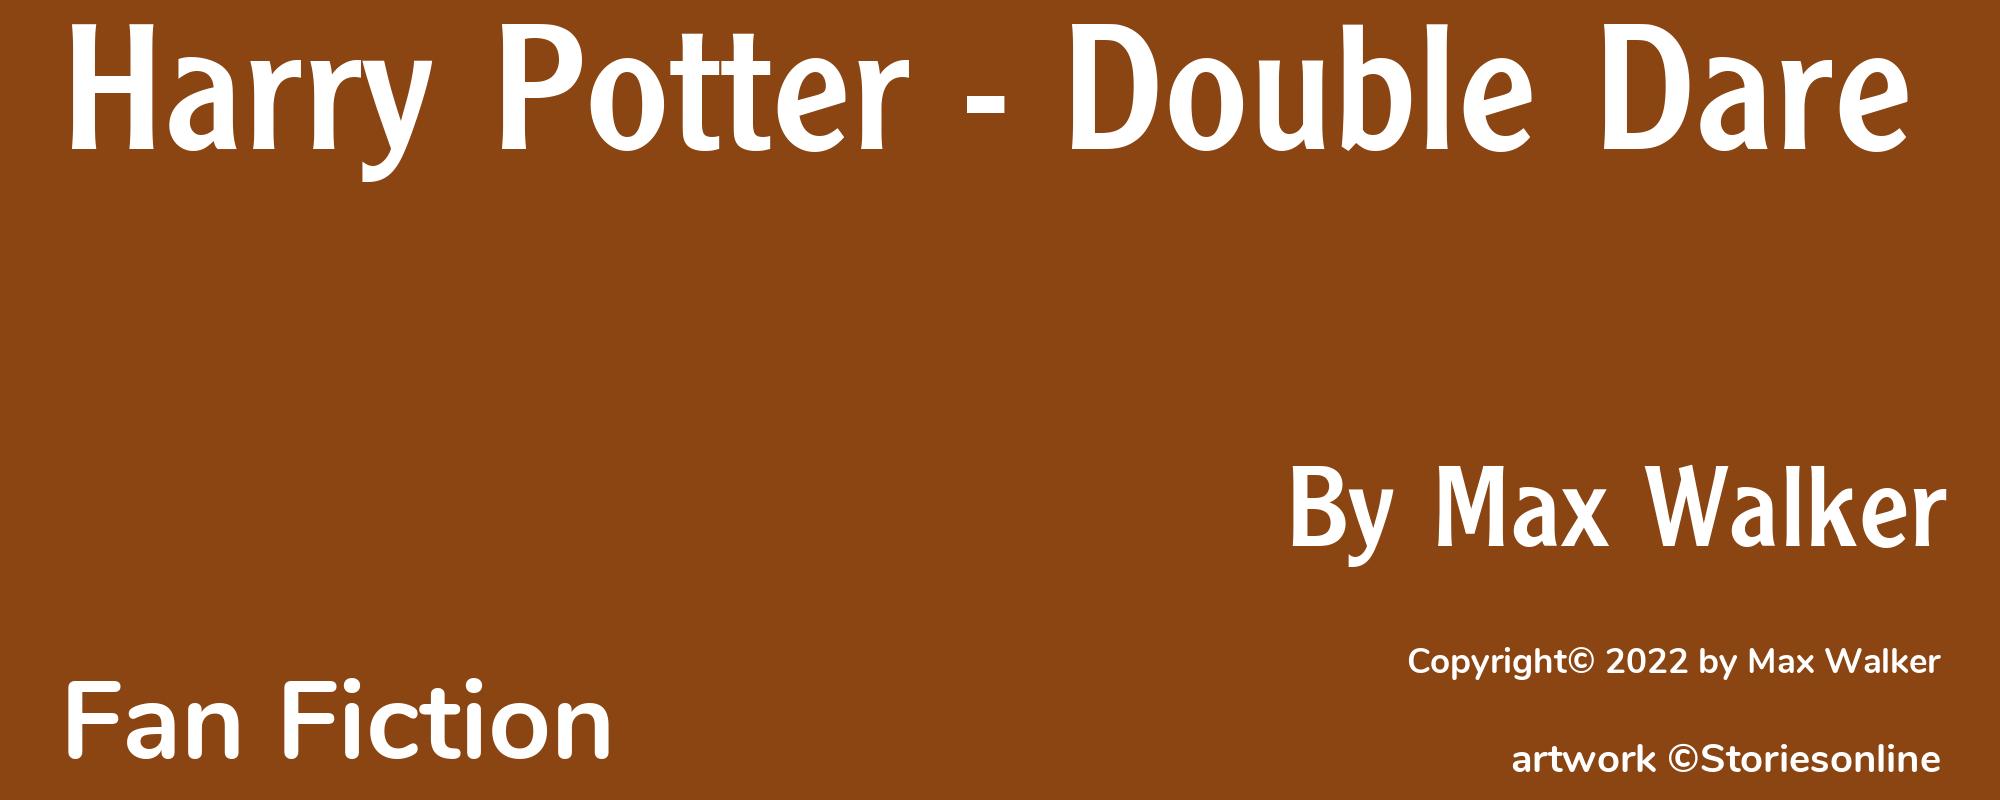 Harry Potter - Double Dare - Cover